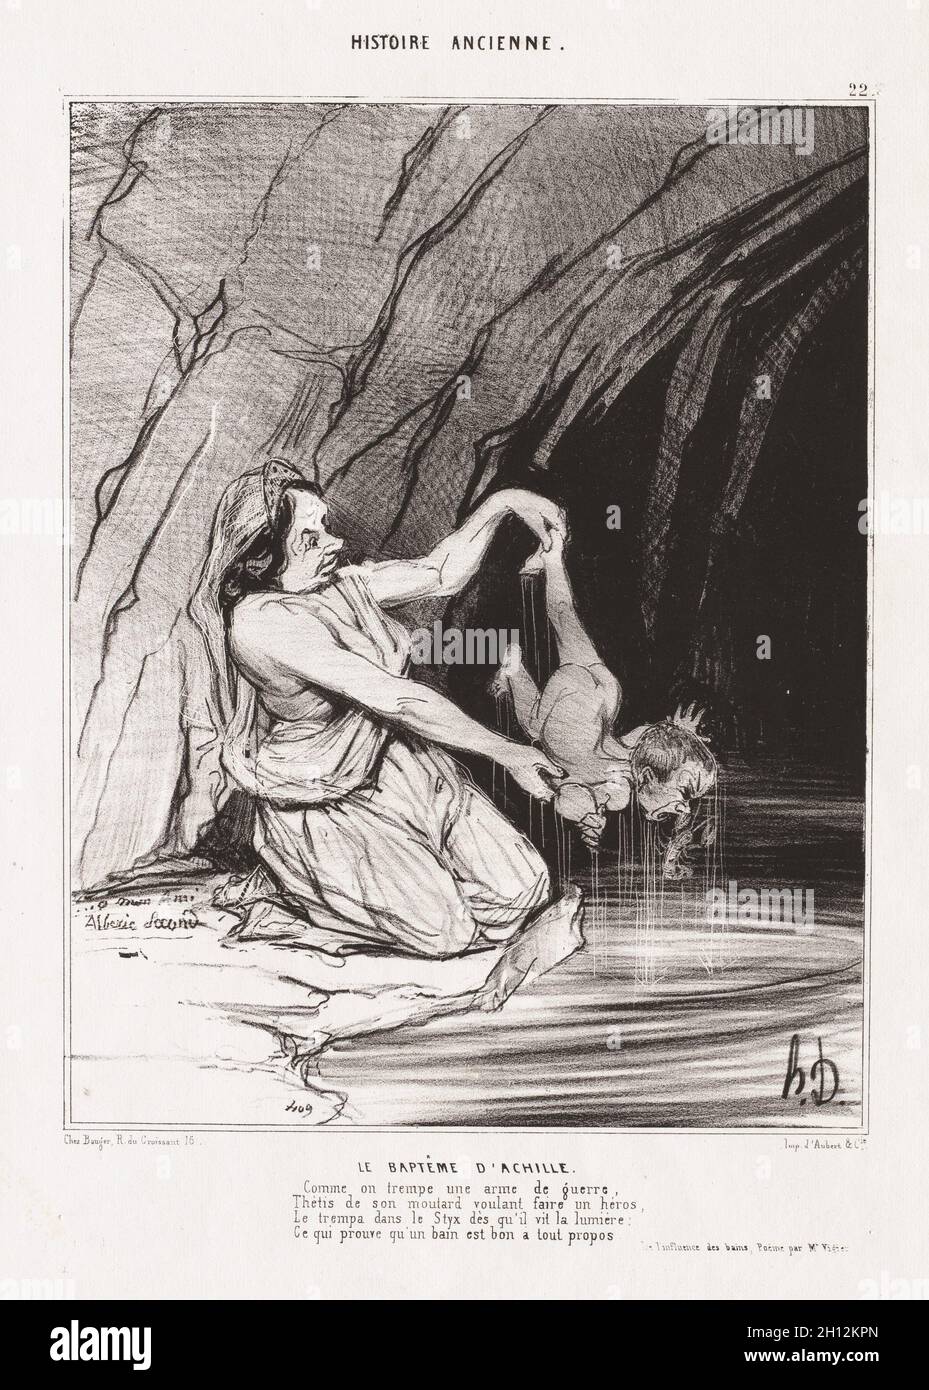 Ancient History: Pl. 22, The Baptism of Achilles. Honoré Daumier (French,  1808-1879). Lithograph; sheet: 33.6 x 25.5 cm (13 1/4 x 10 1/16 in.);  image: 20.3 x 19.7 cm (8 x 7 3/4 in Stock Photo - Alamy